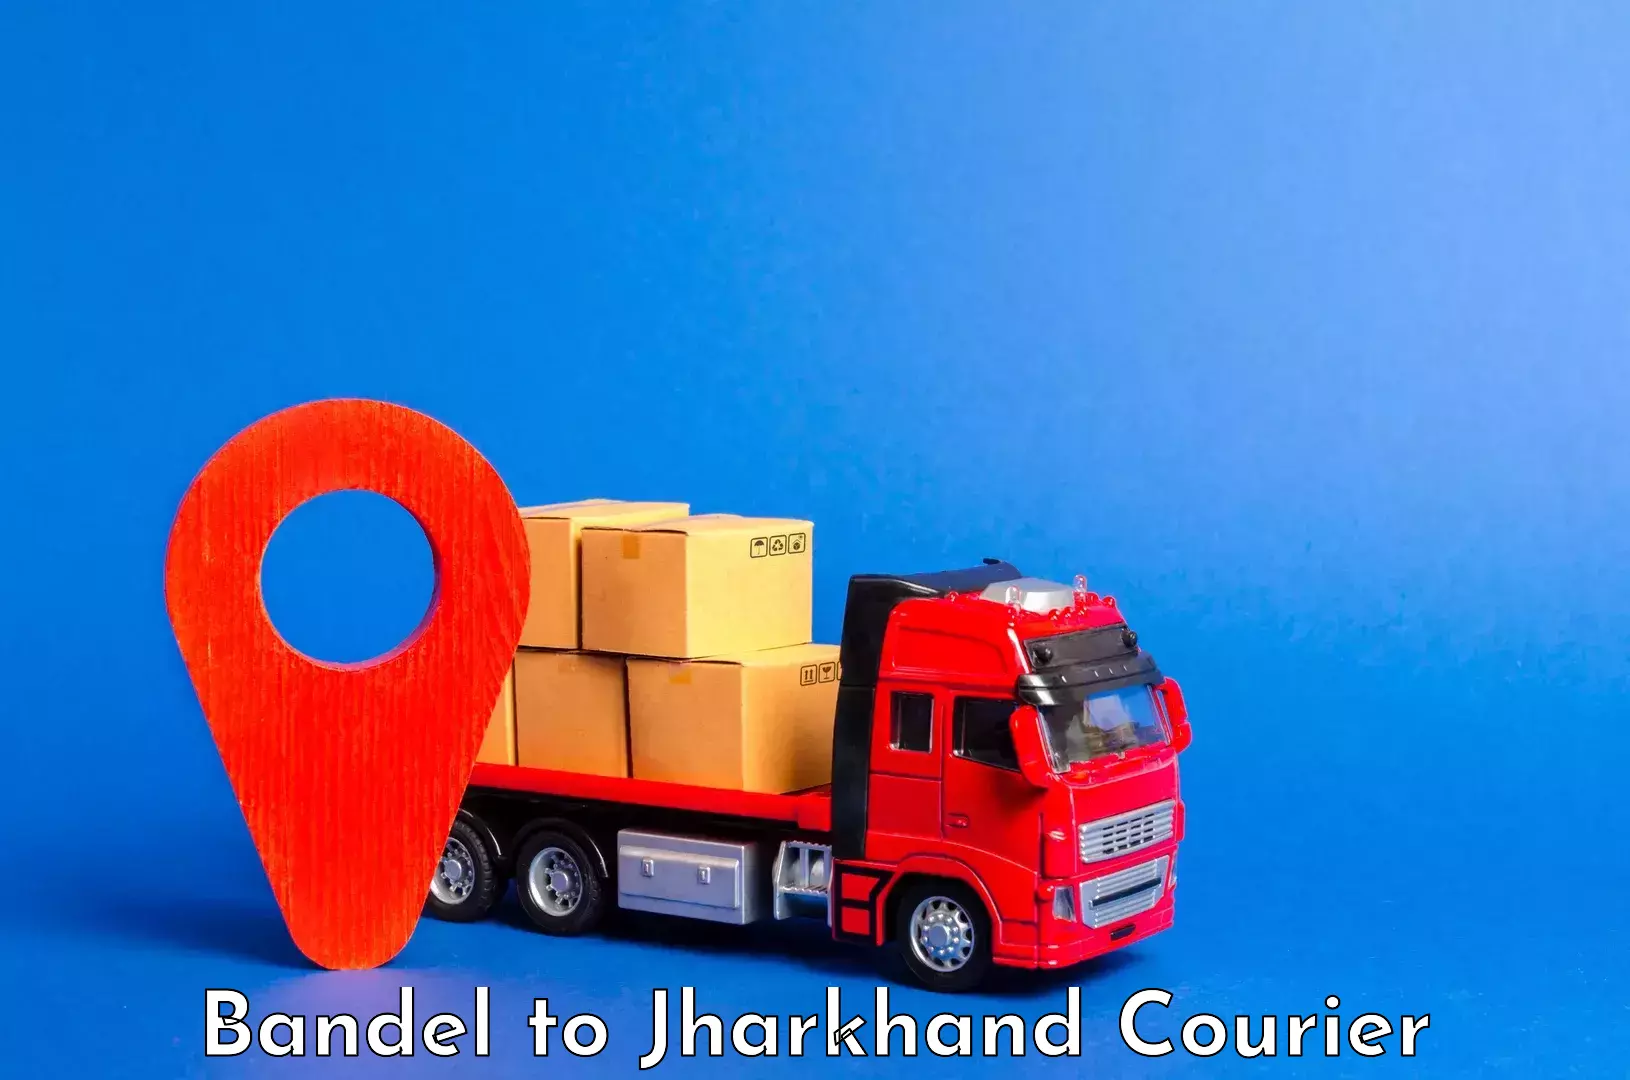 Automated luggage transport in Bandel to Jharkhand